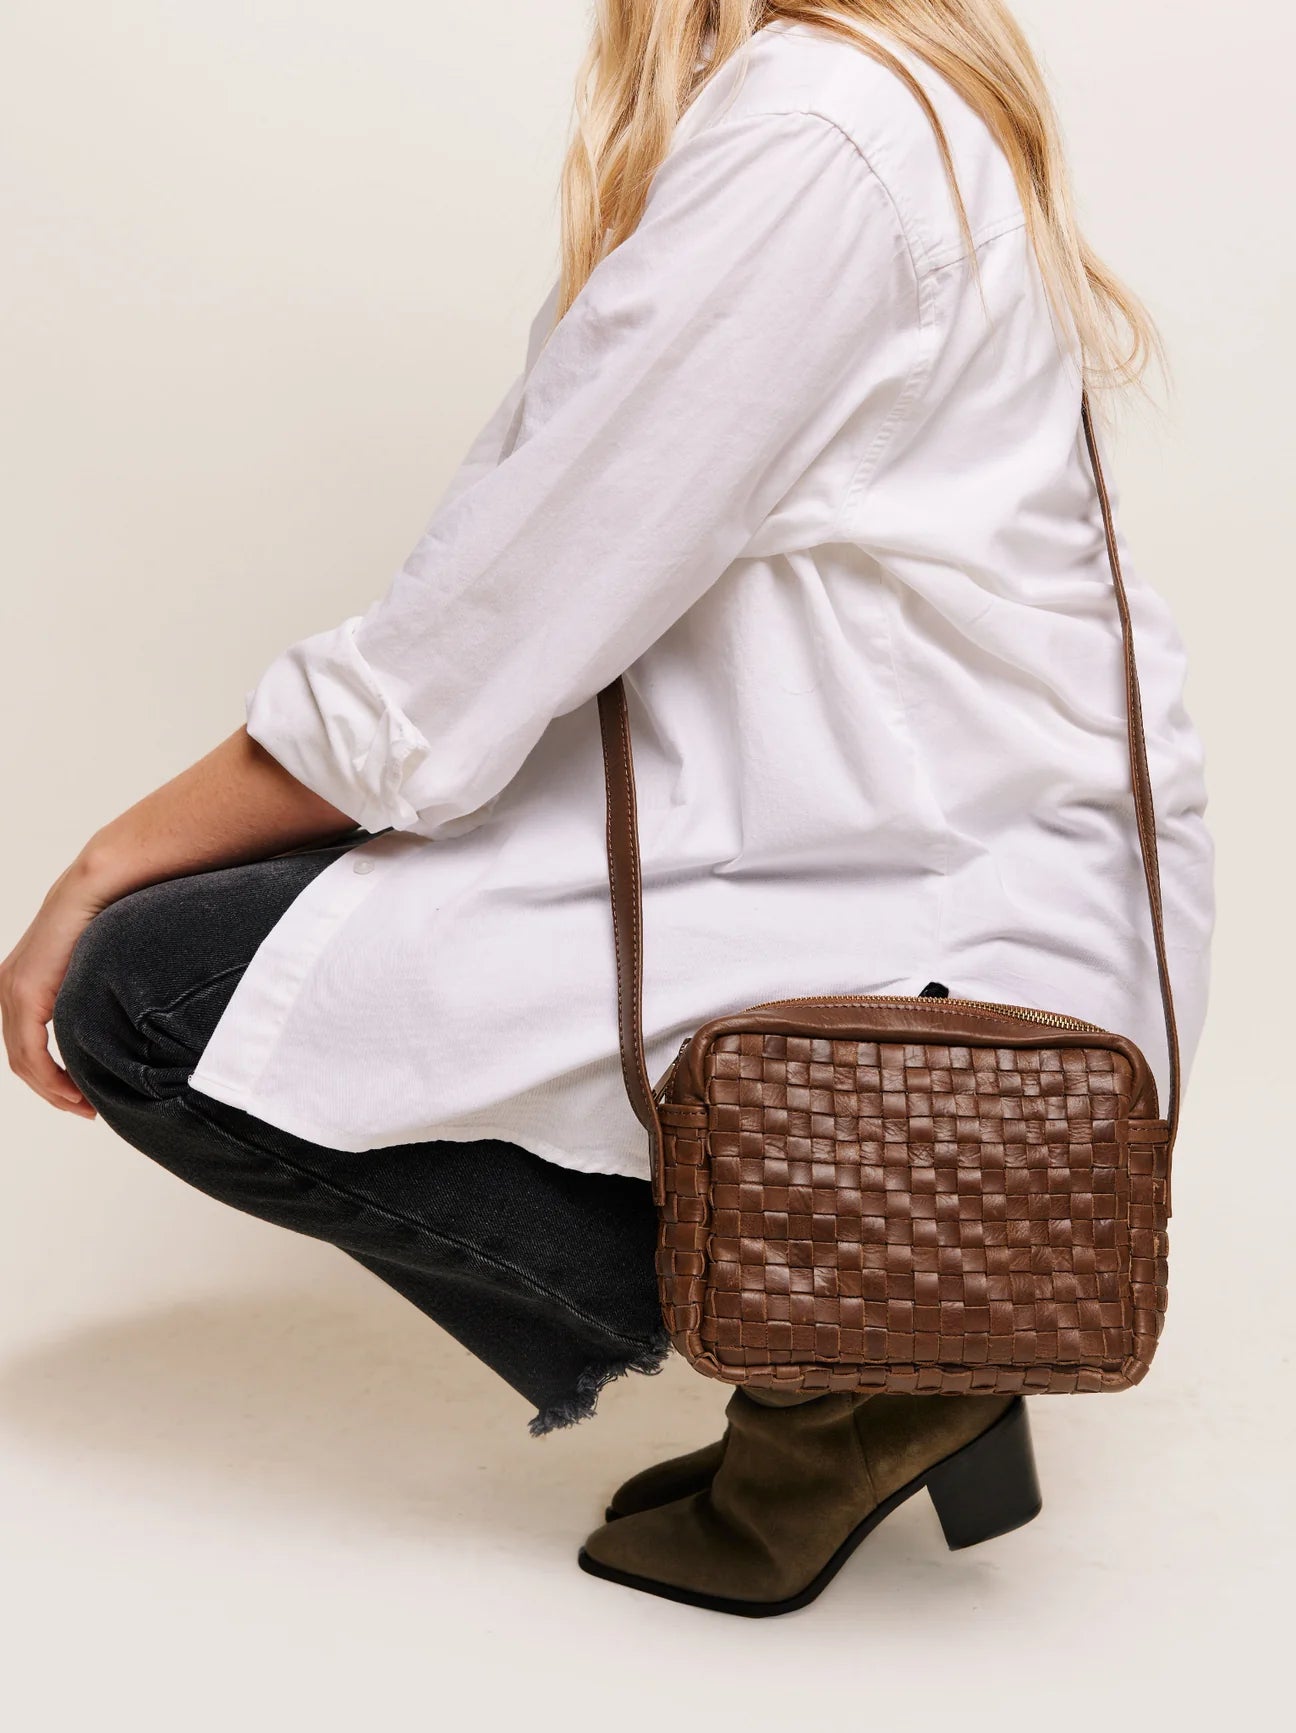 Basketweave woven leather brown purse crossbody ethical women supported vintage retro look stylish chic casual 70's style women's gift for her leather quality 